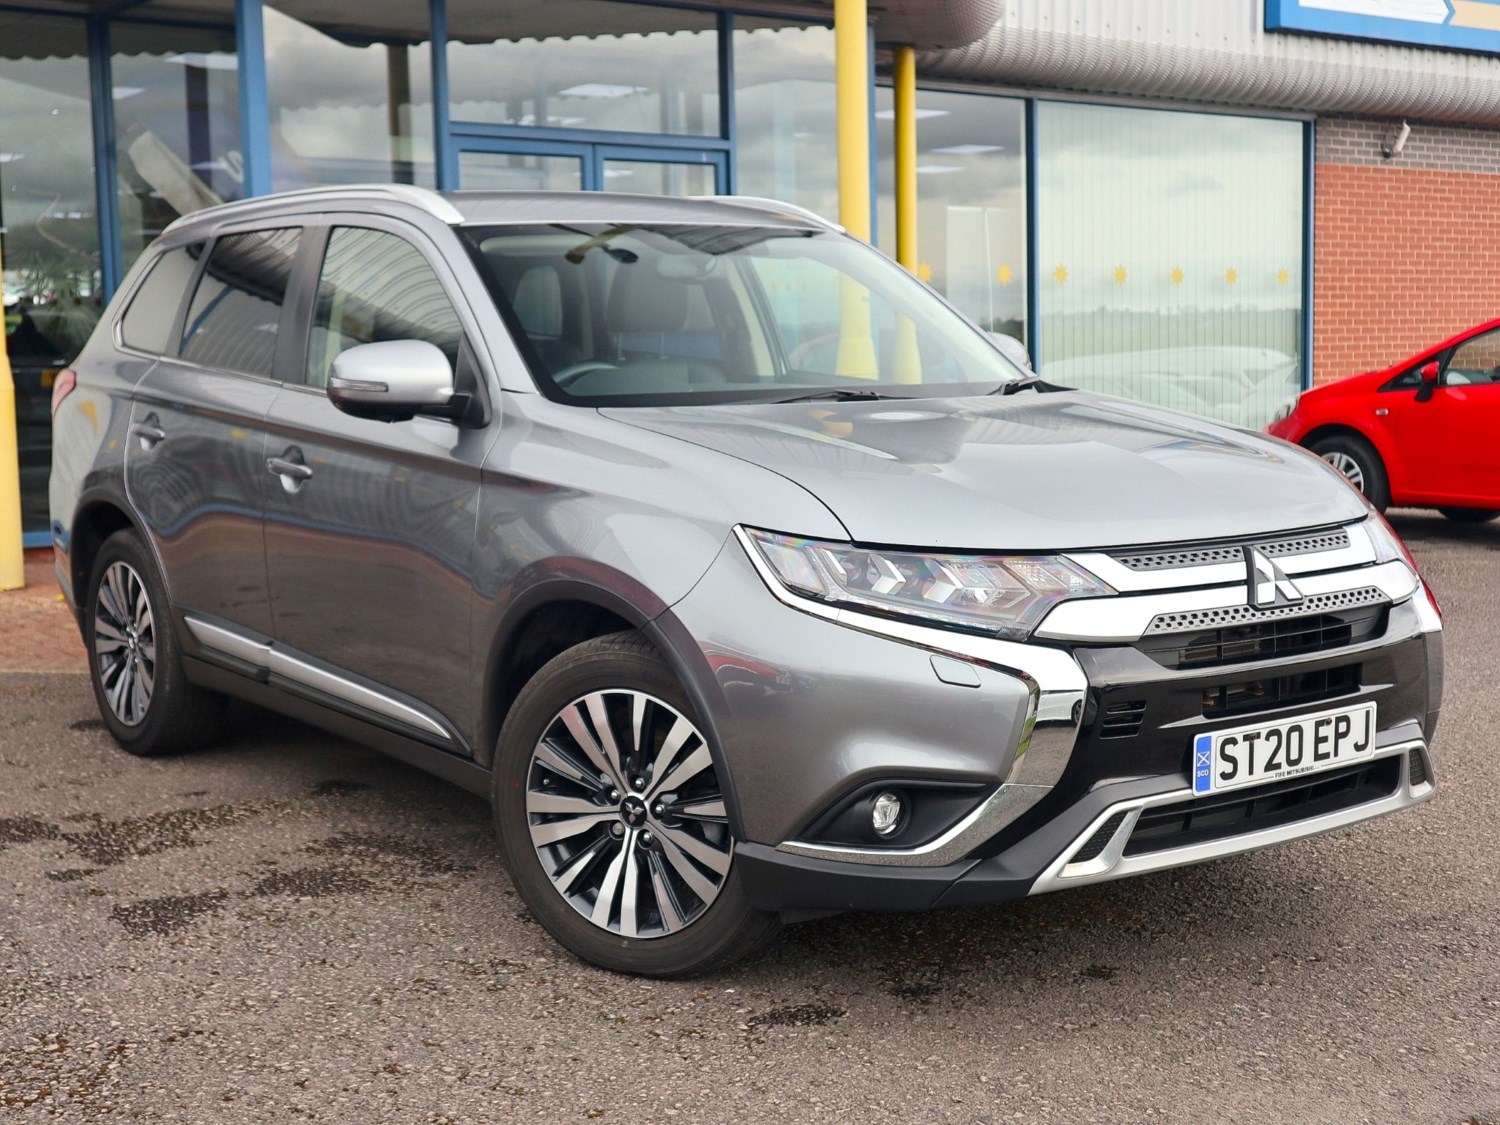 2020 used Mitsubishi Outlander 2.0 Exceed Mivec 4wd 5DR 4x4 Petrol